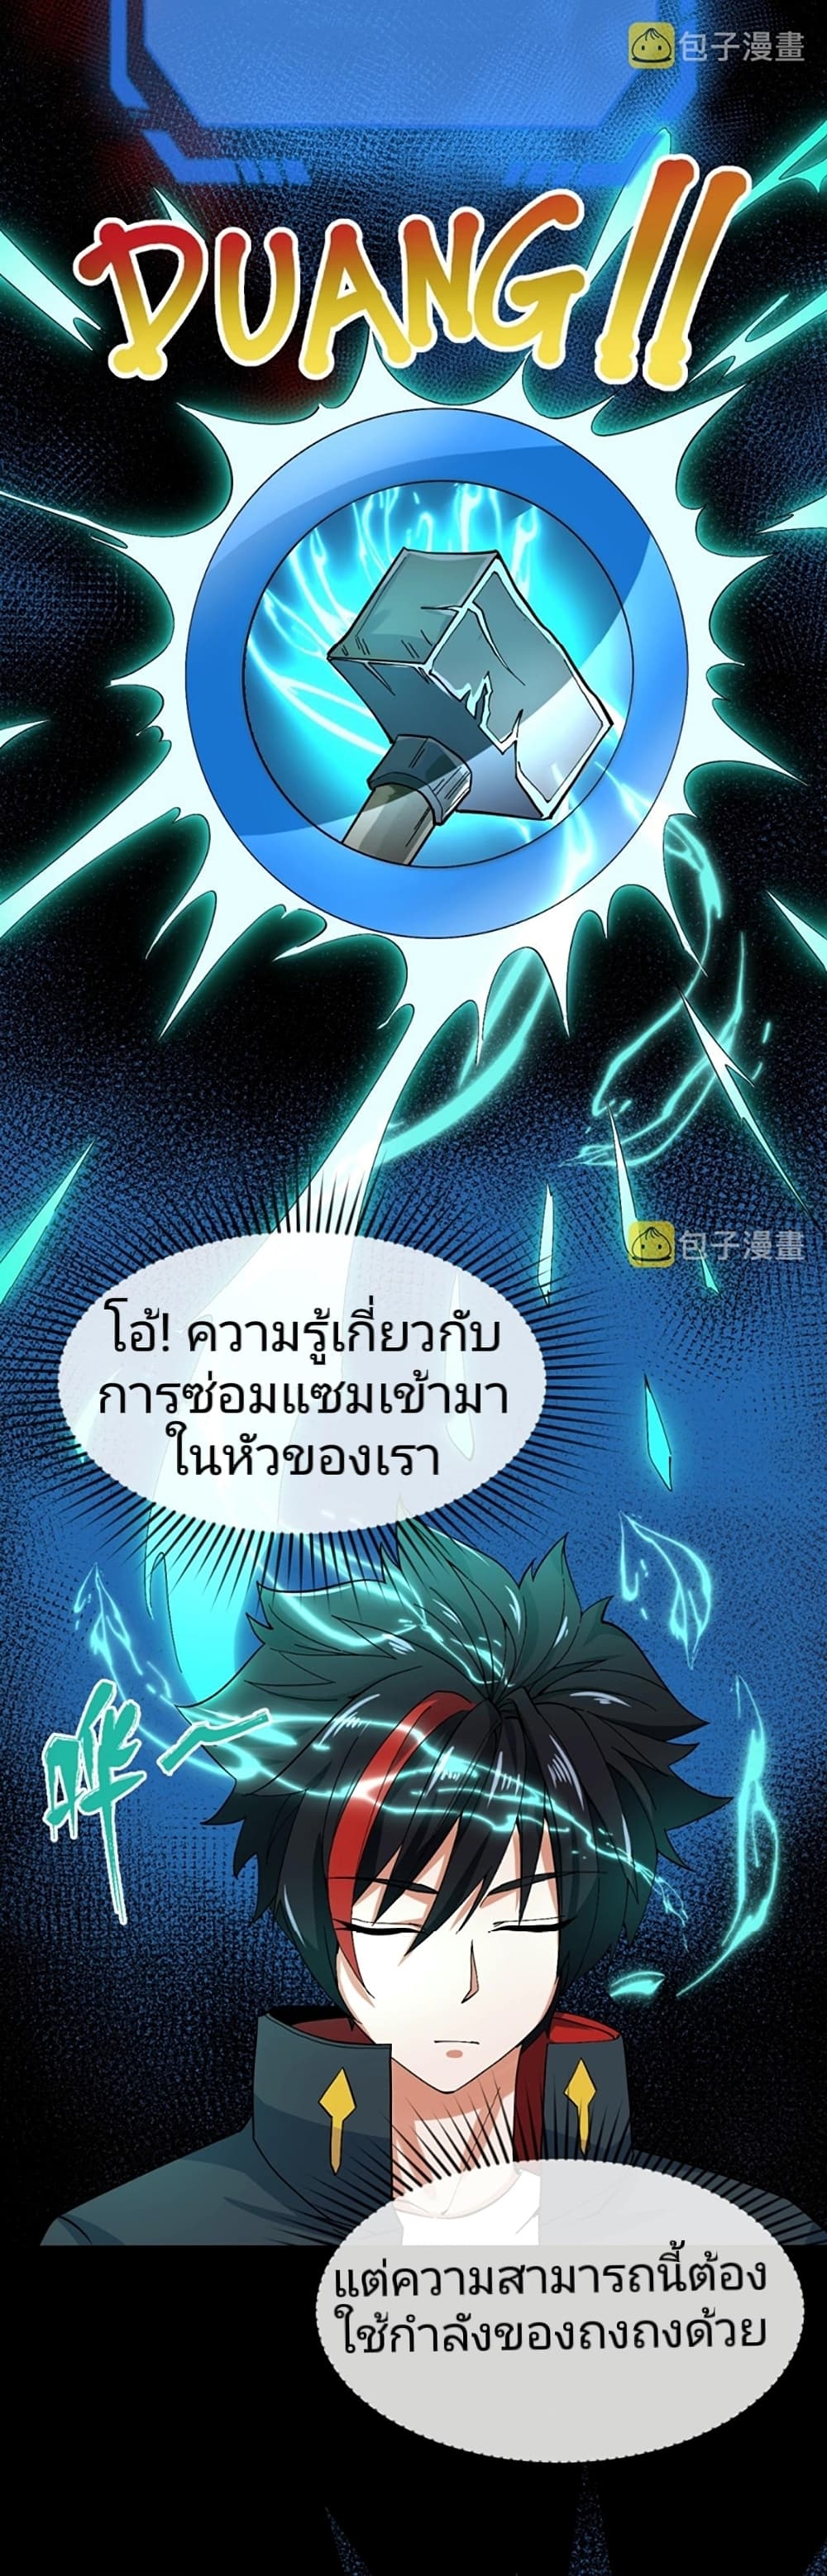 The Age of Ghost Spirits à¸à¸­à¸à¸à¸µà¹ 10 (12)